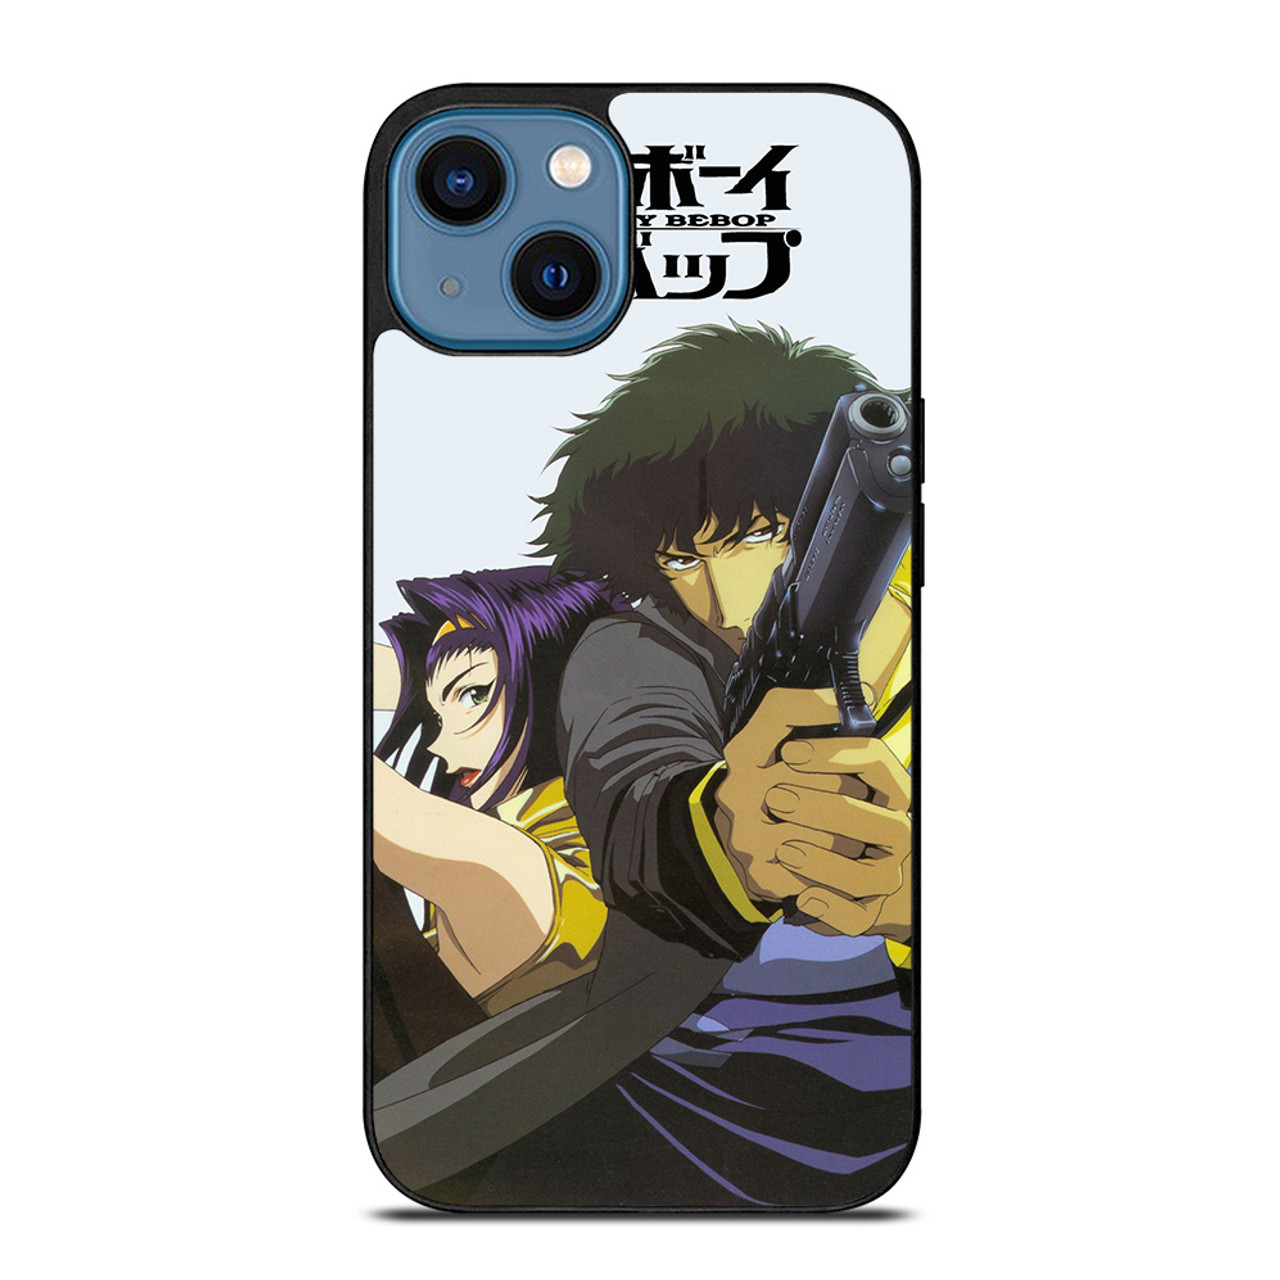 Anime iPhone Cases Anime Phone Cases Aesthetic Phone Case - Etsy